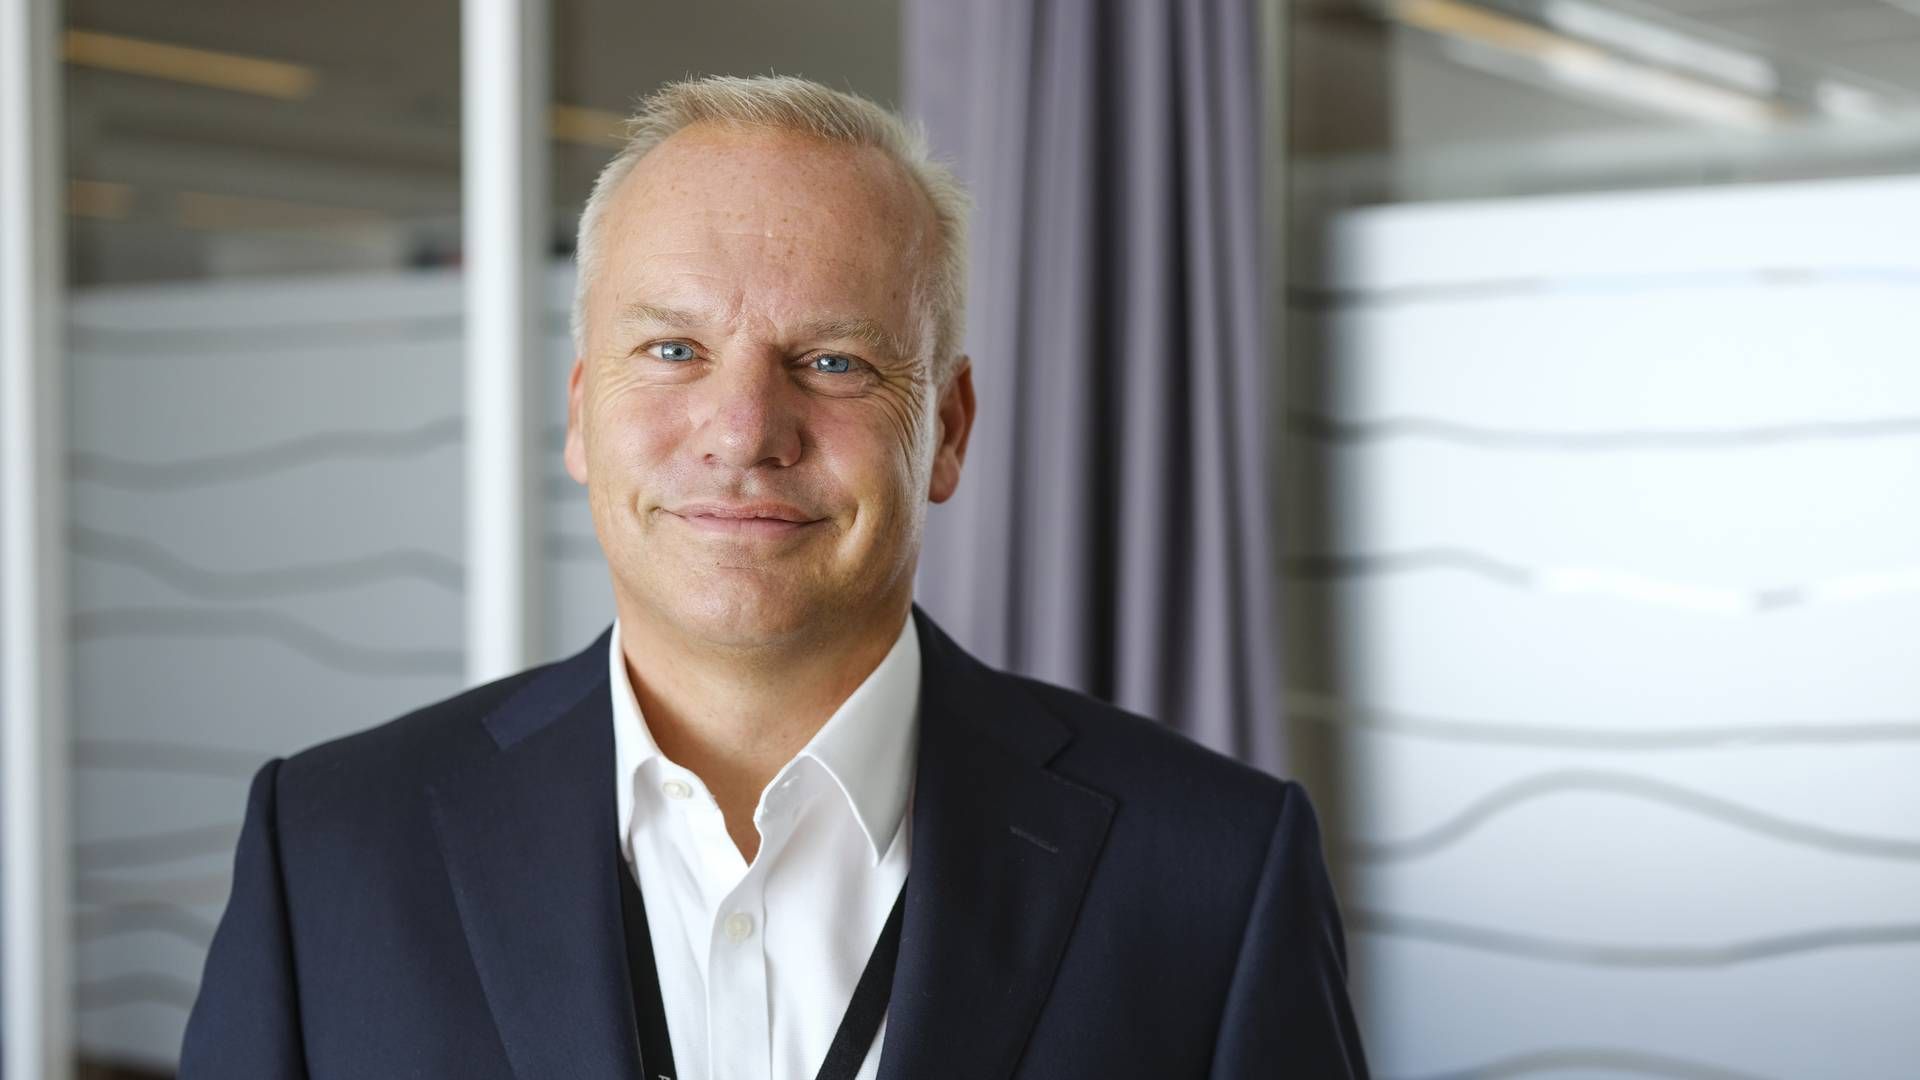 Anders Opedal, CEO of Equinor, has reason to celebrate the energy company's recent financial figures – though he is also concerned about the current safety challenges in the North Sea | Photo: PR / Equinor / Ole Jørgen Bratland